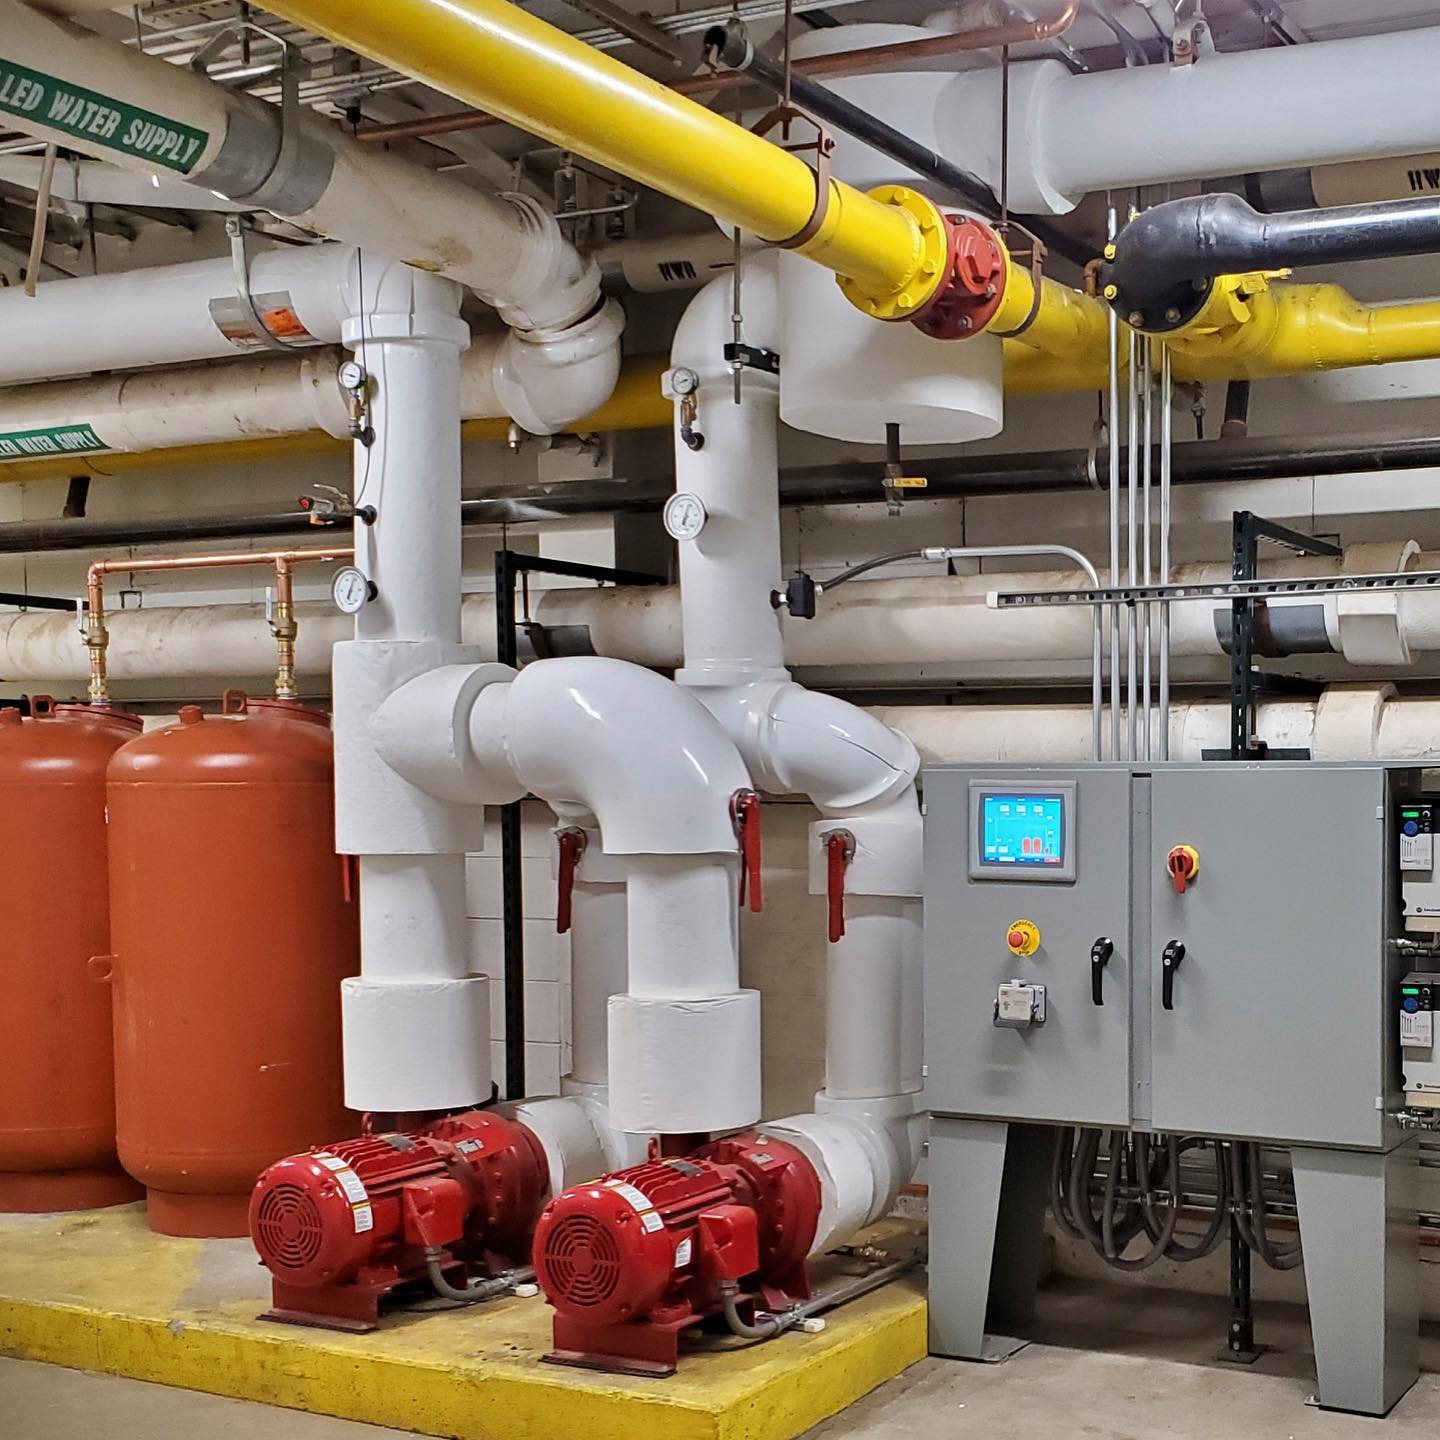 Recent design-build project for a Fortune 500 chemical manufacturer. We replaced an existing boiler and pump system with high efficiency 6,000 BTU condensing hot water boilers (18,000 BTU total) saving the customer 52,000+ Therms per year amounting to $52,325 saved per year.We redesigned and repiped the system, eliminating 3 pumps and saving an additional 16,000+ KWH. The customer also received a $75,000 utility rebate from the power company.